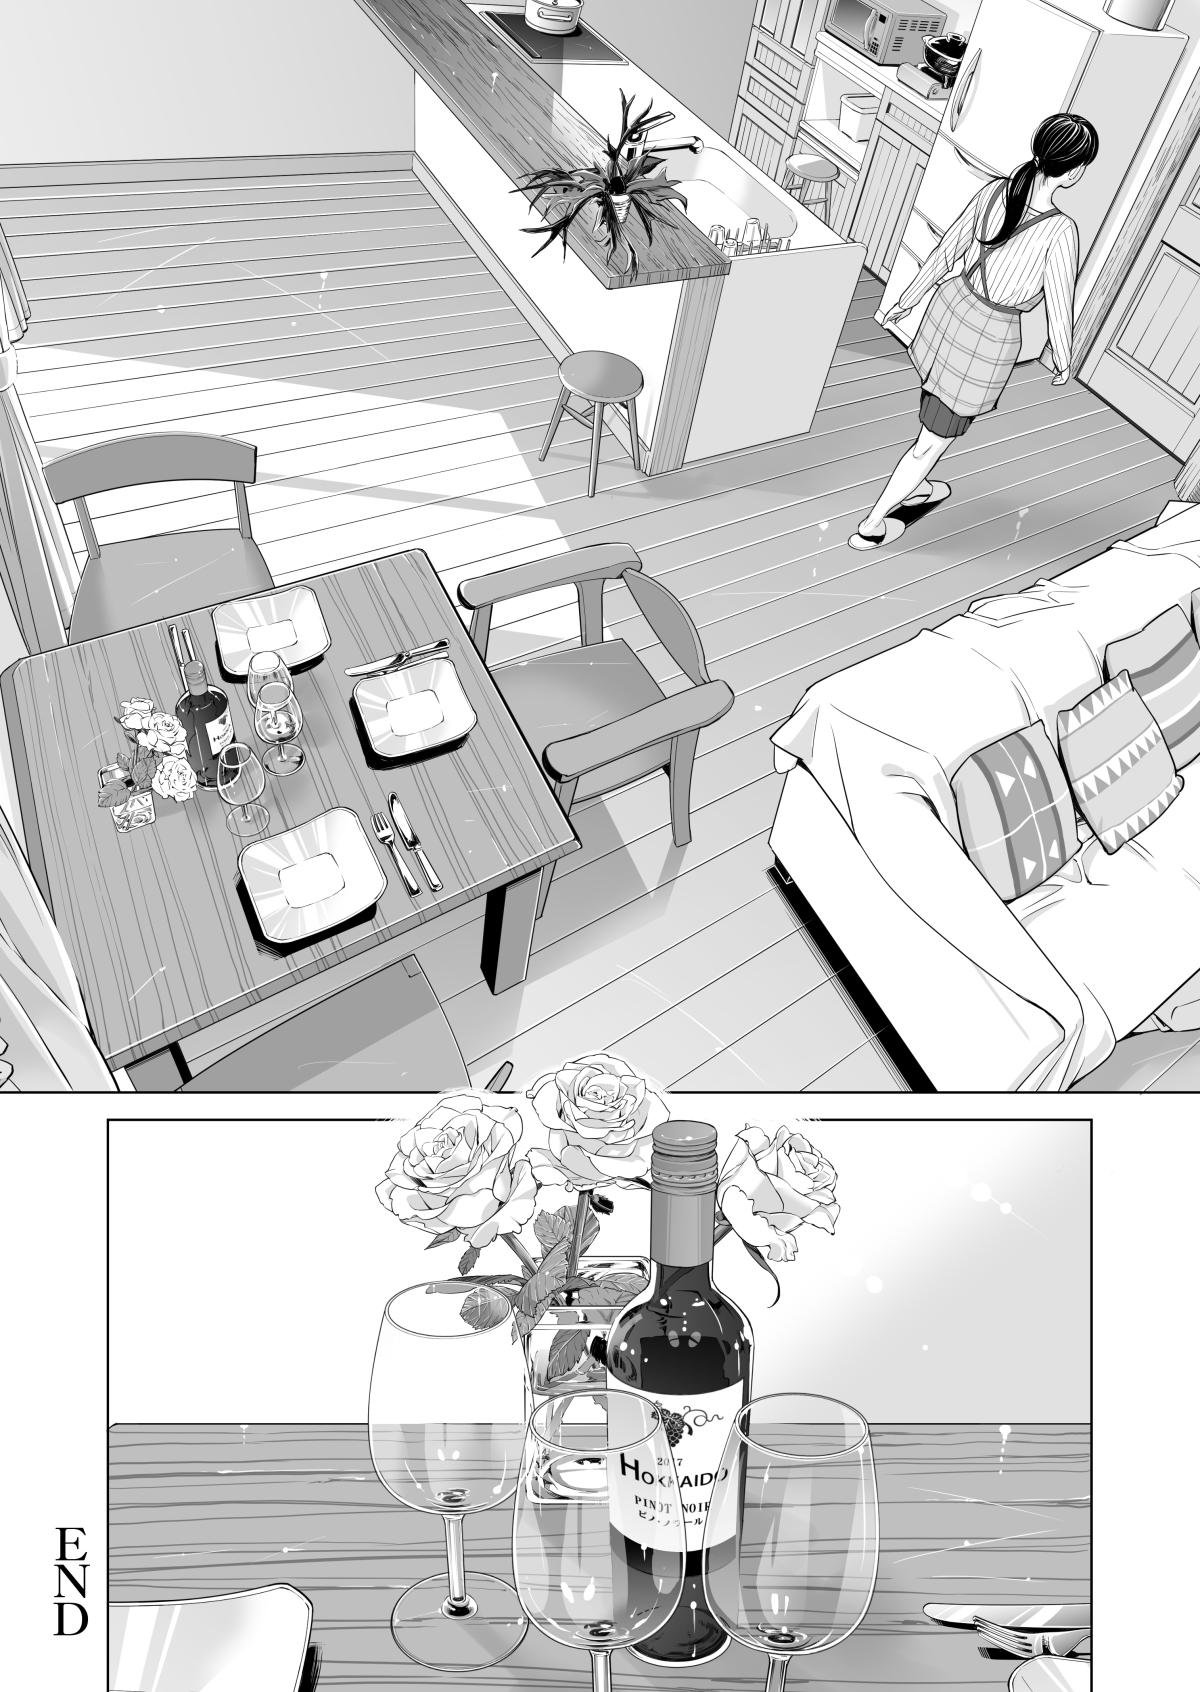 [HGT Lab (Tsusauto)] Tsukiyo no Midare Zake (Kouhen) Moonlit Intoxication ~ A Housewife Stolen by a Coworker Besides her Blackout Drunk Husband ~ Chapter 2 [English] 71